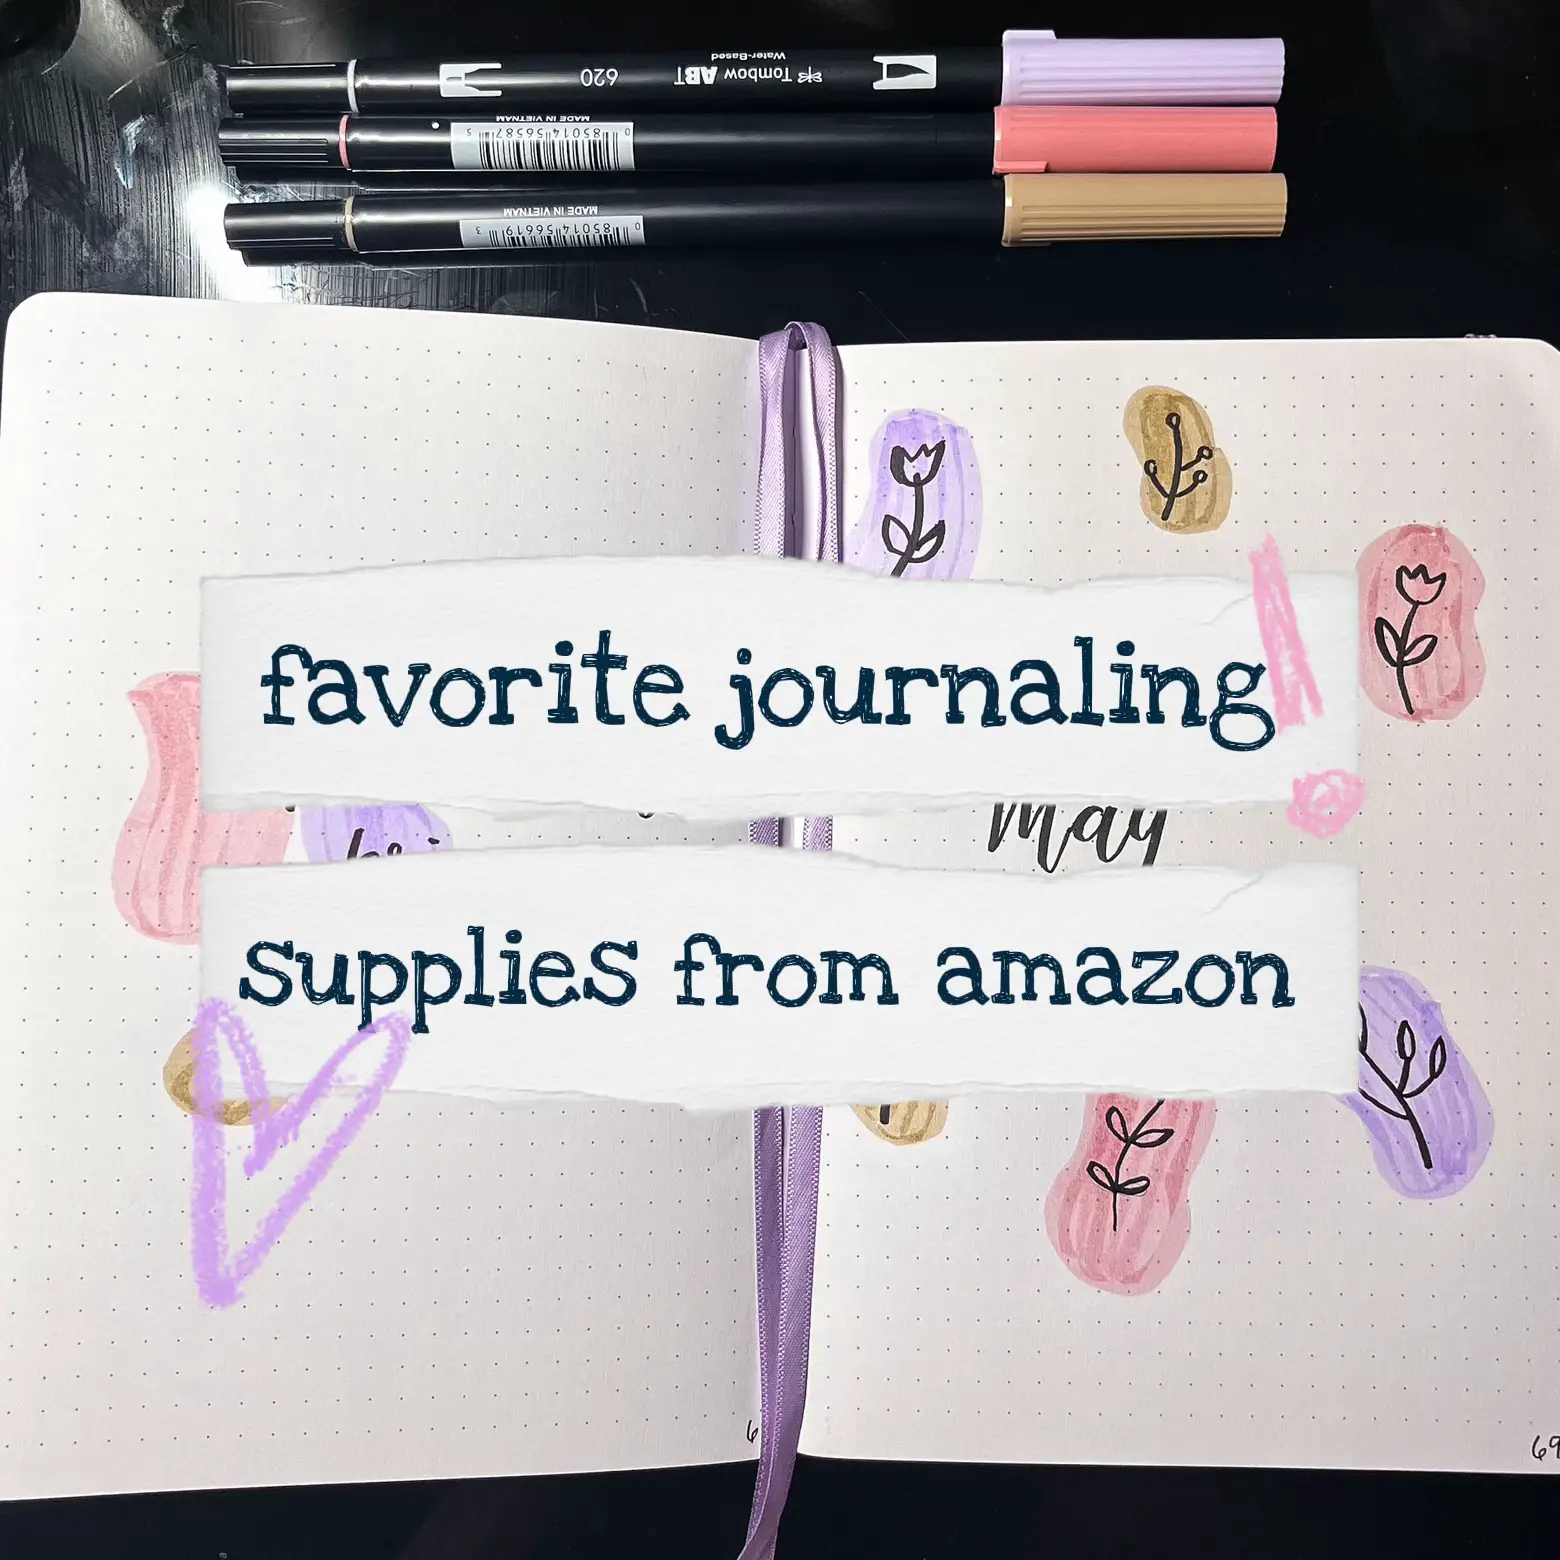 book journaling supplies and materials - Lemon8 Search